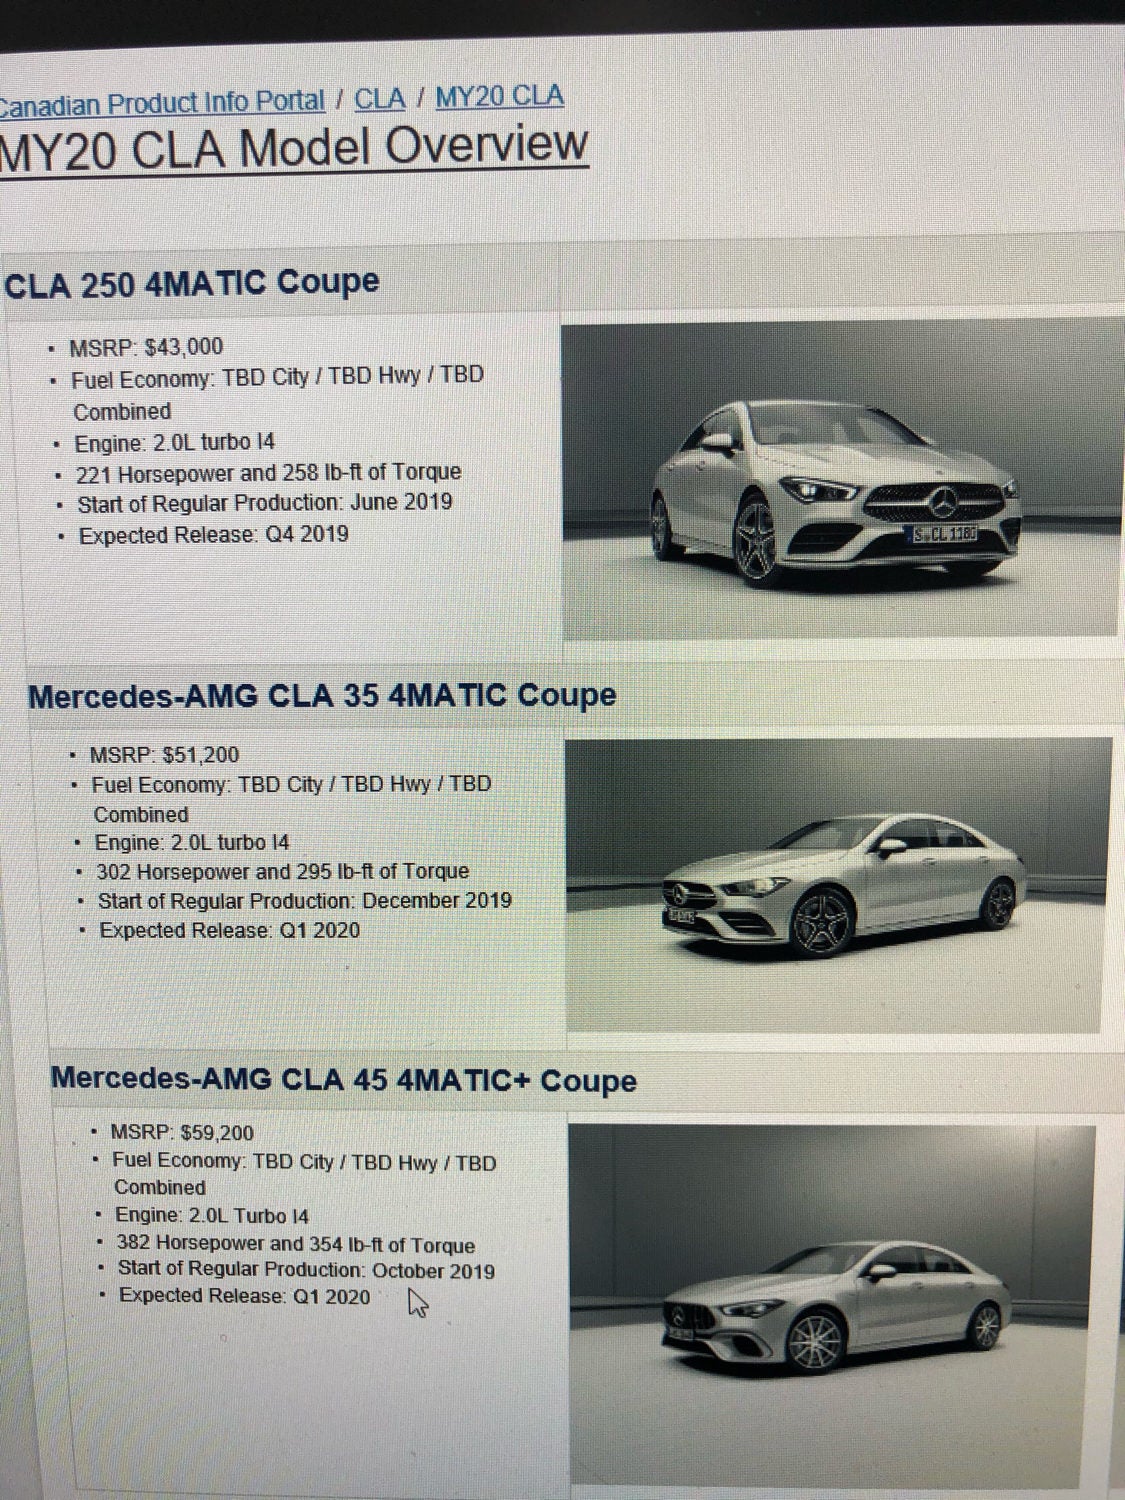 Mercedes-Benz questions and answers - Page 198 - RedFlagDeals.com Forums